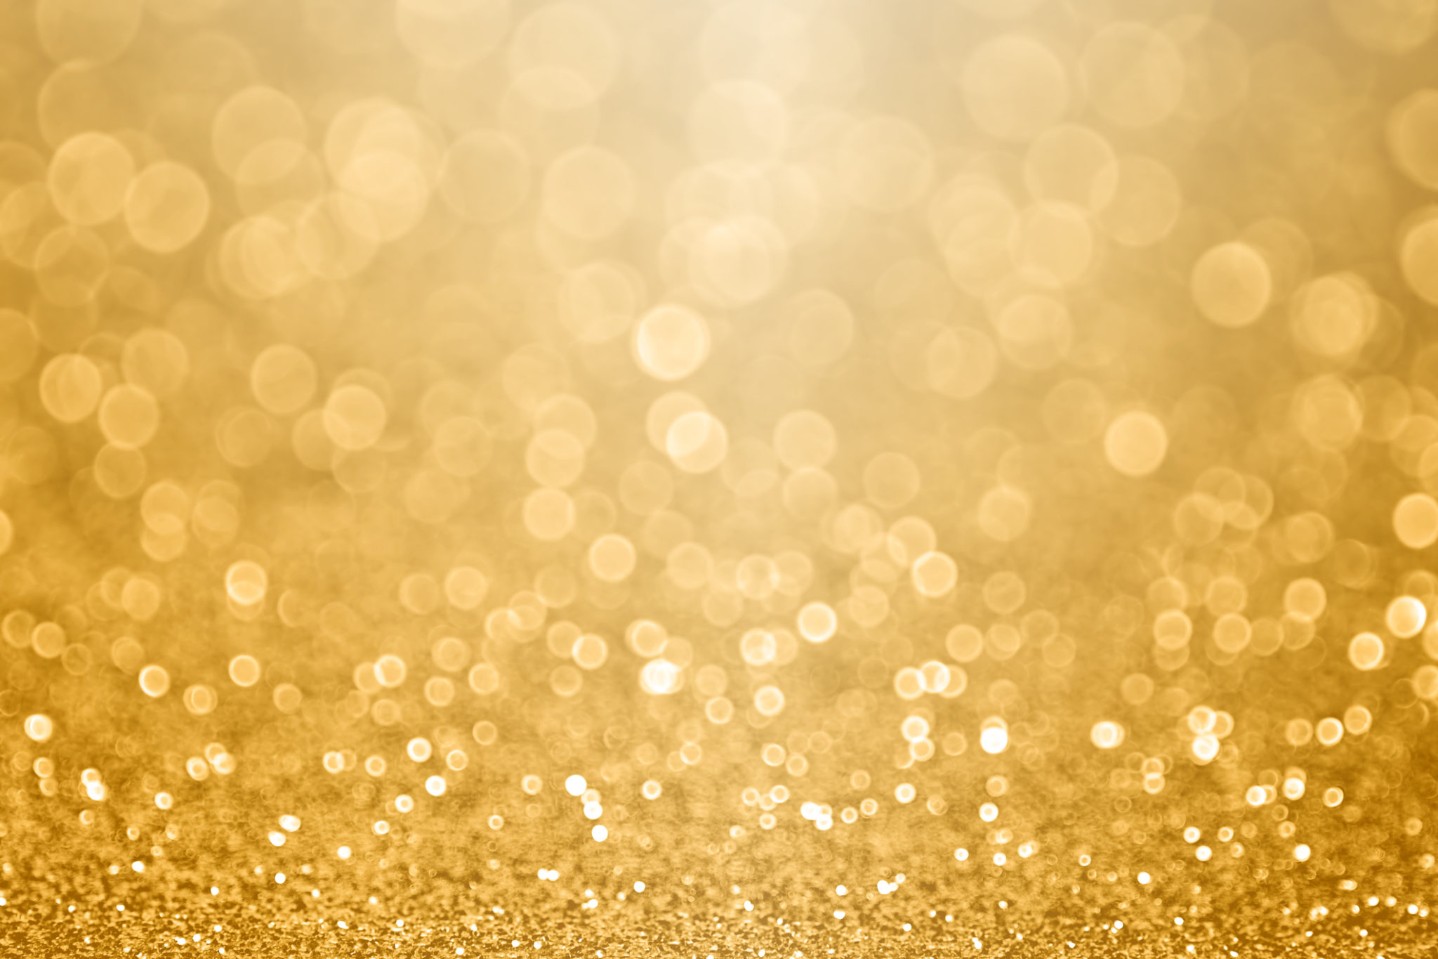 Gold celebration background for anniversary, New Year Eve, Christmas, falling coins, wedding or birthday||462578089